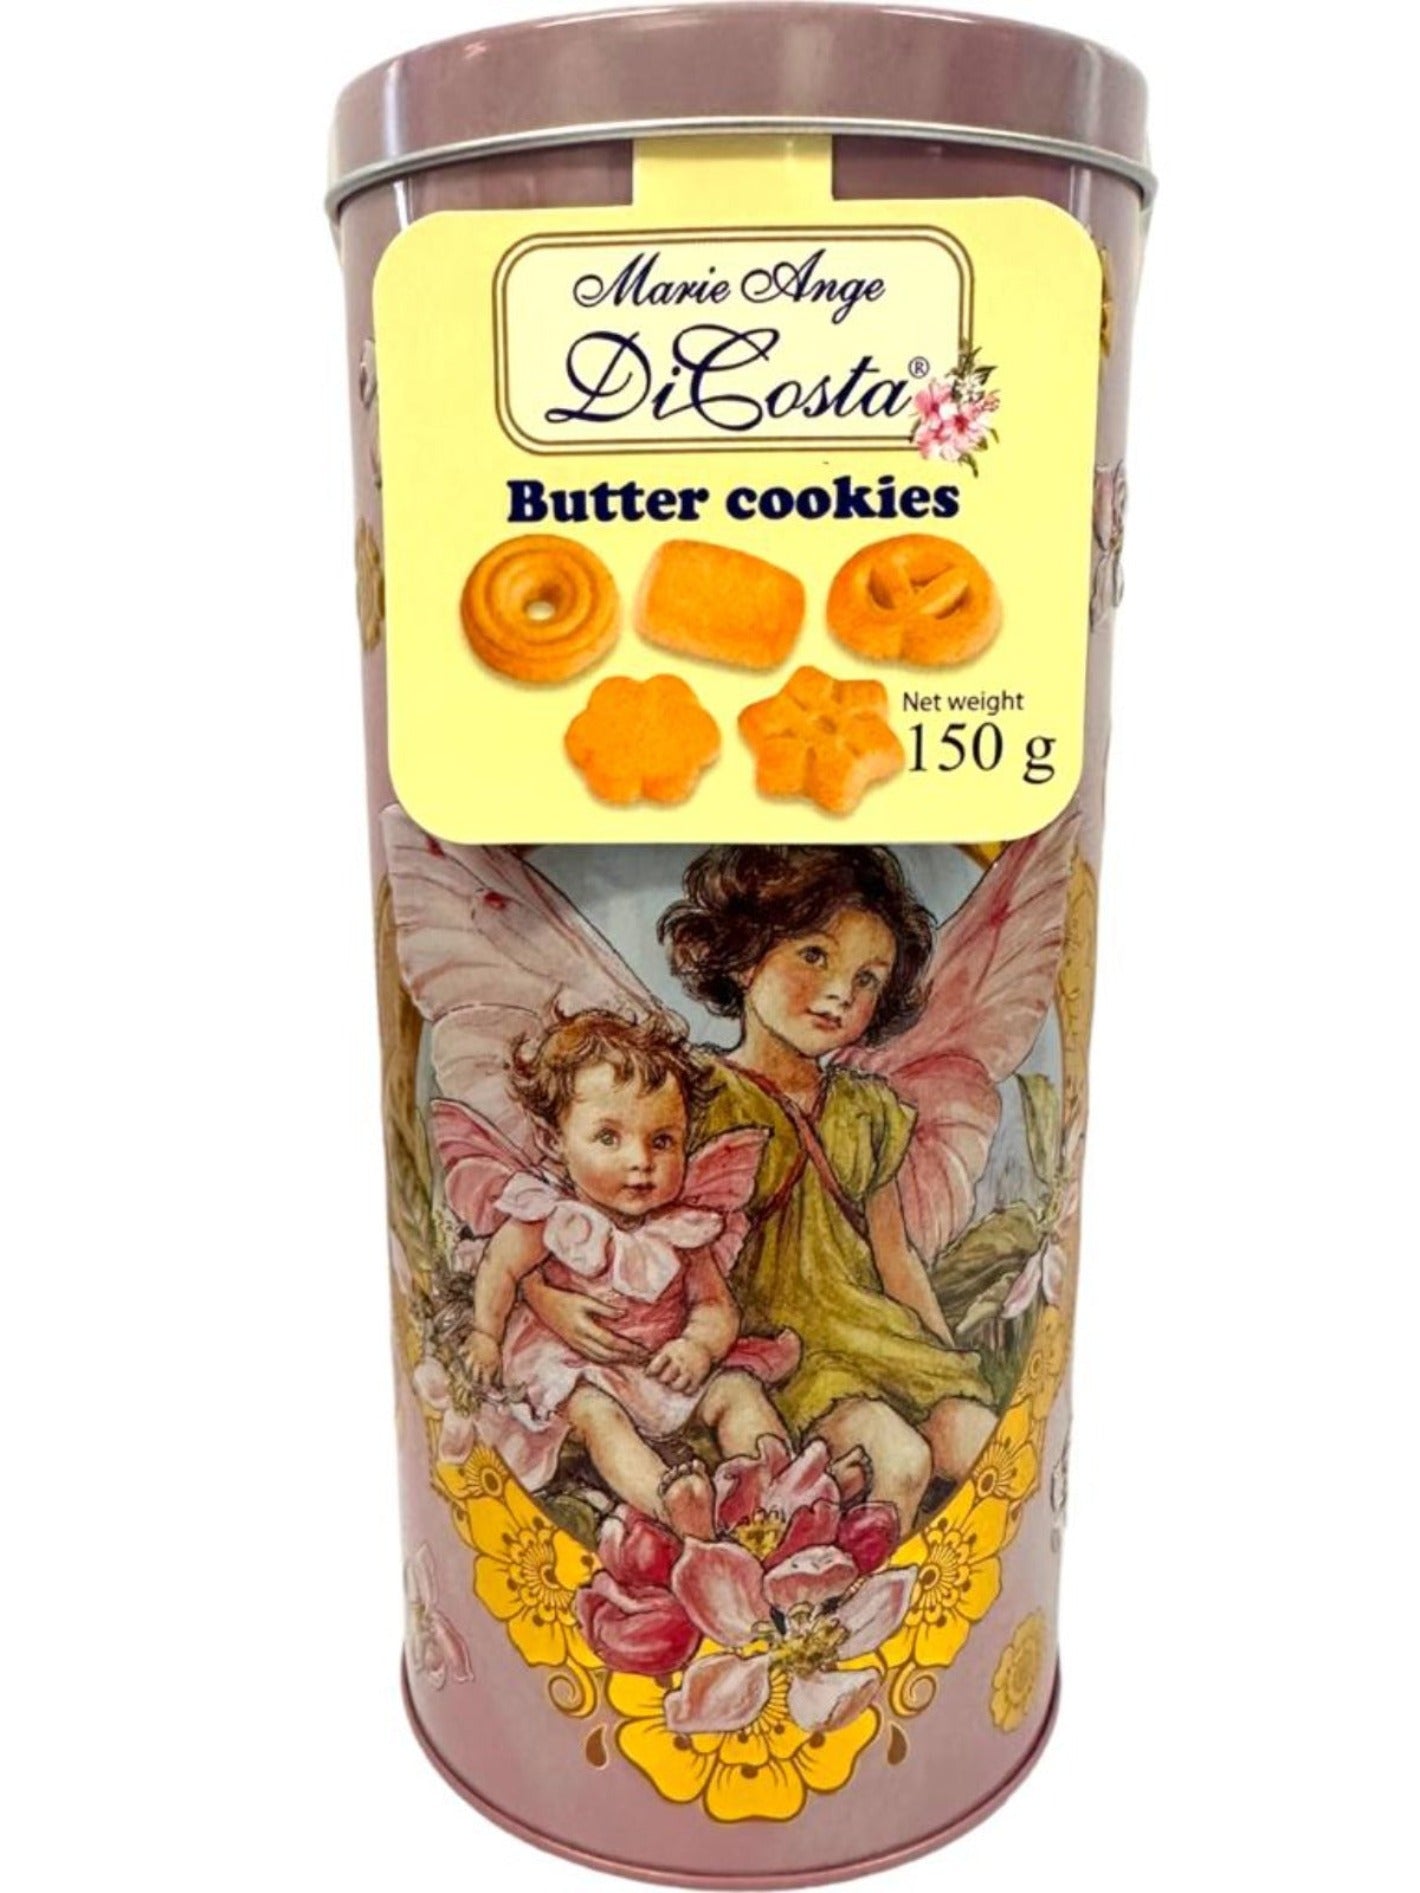 Marie Ange di Costa Flower Fairy Italian Butter Cookies—Il Desiderio in Rose Gold 150g